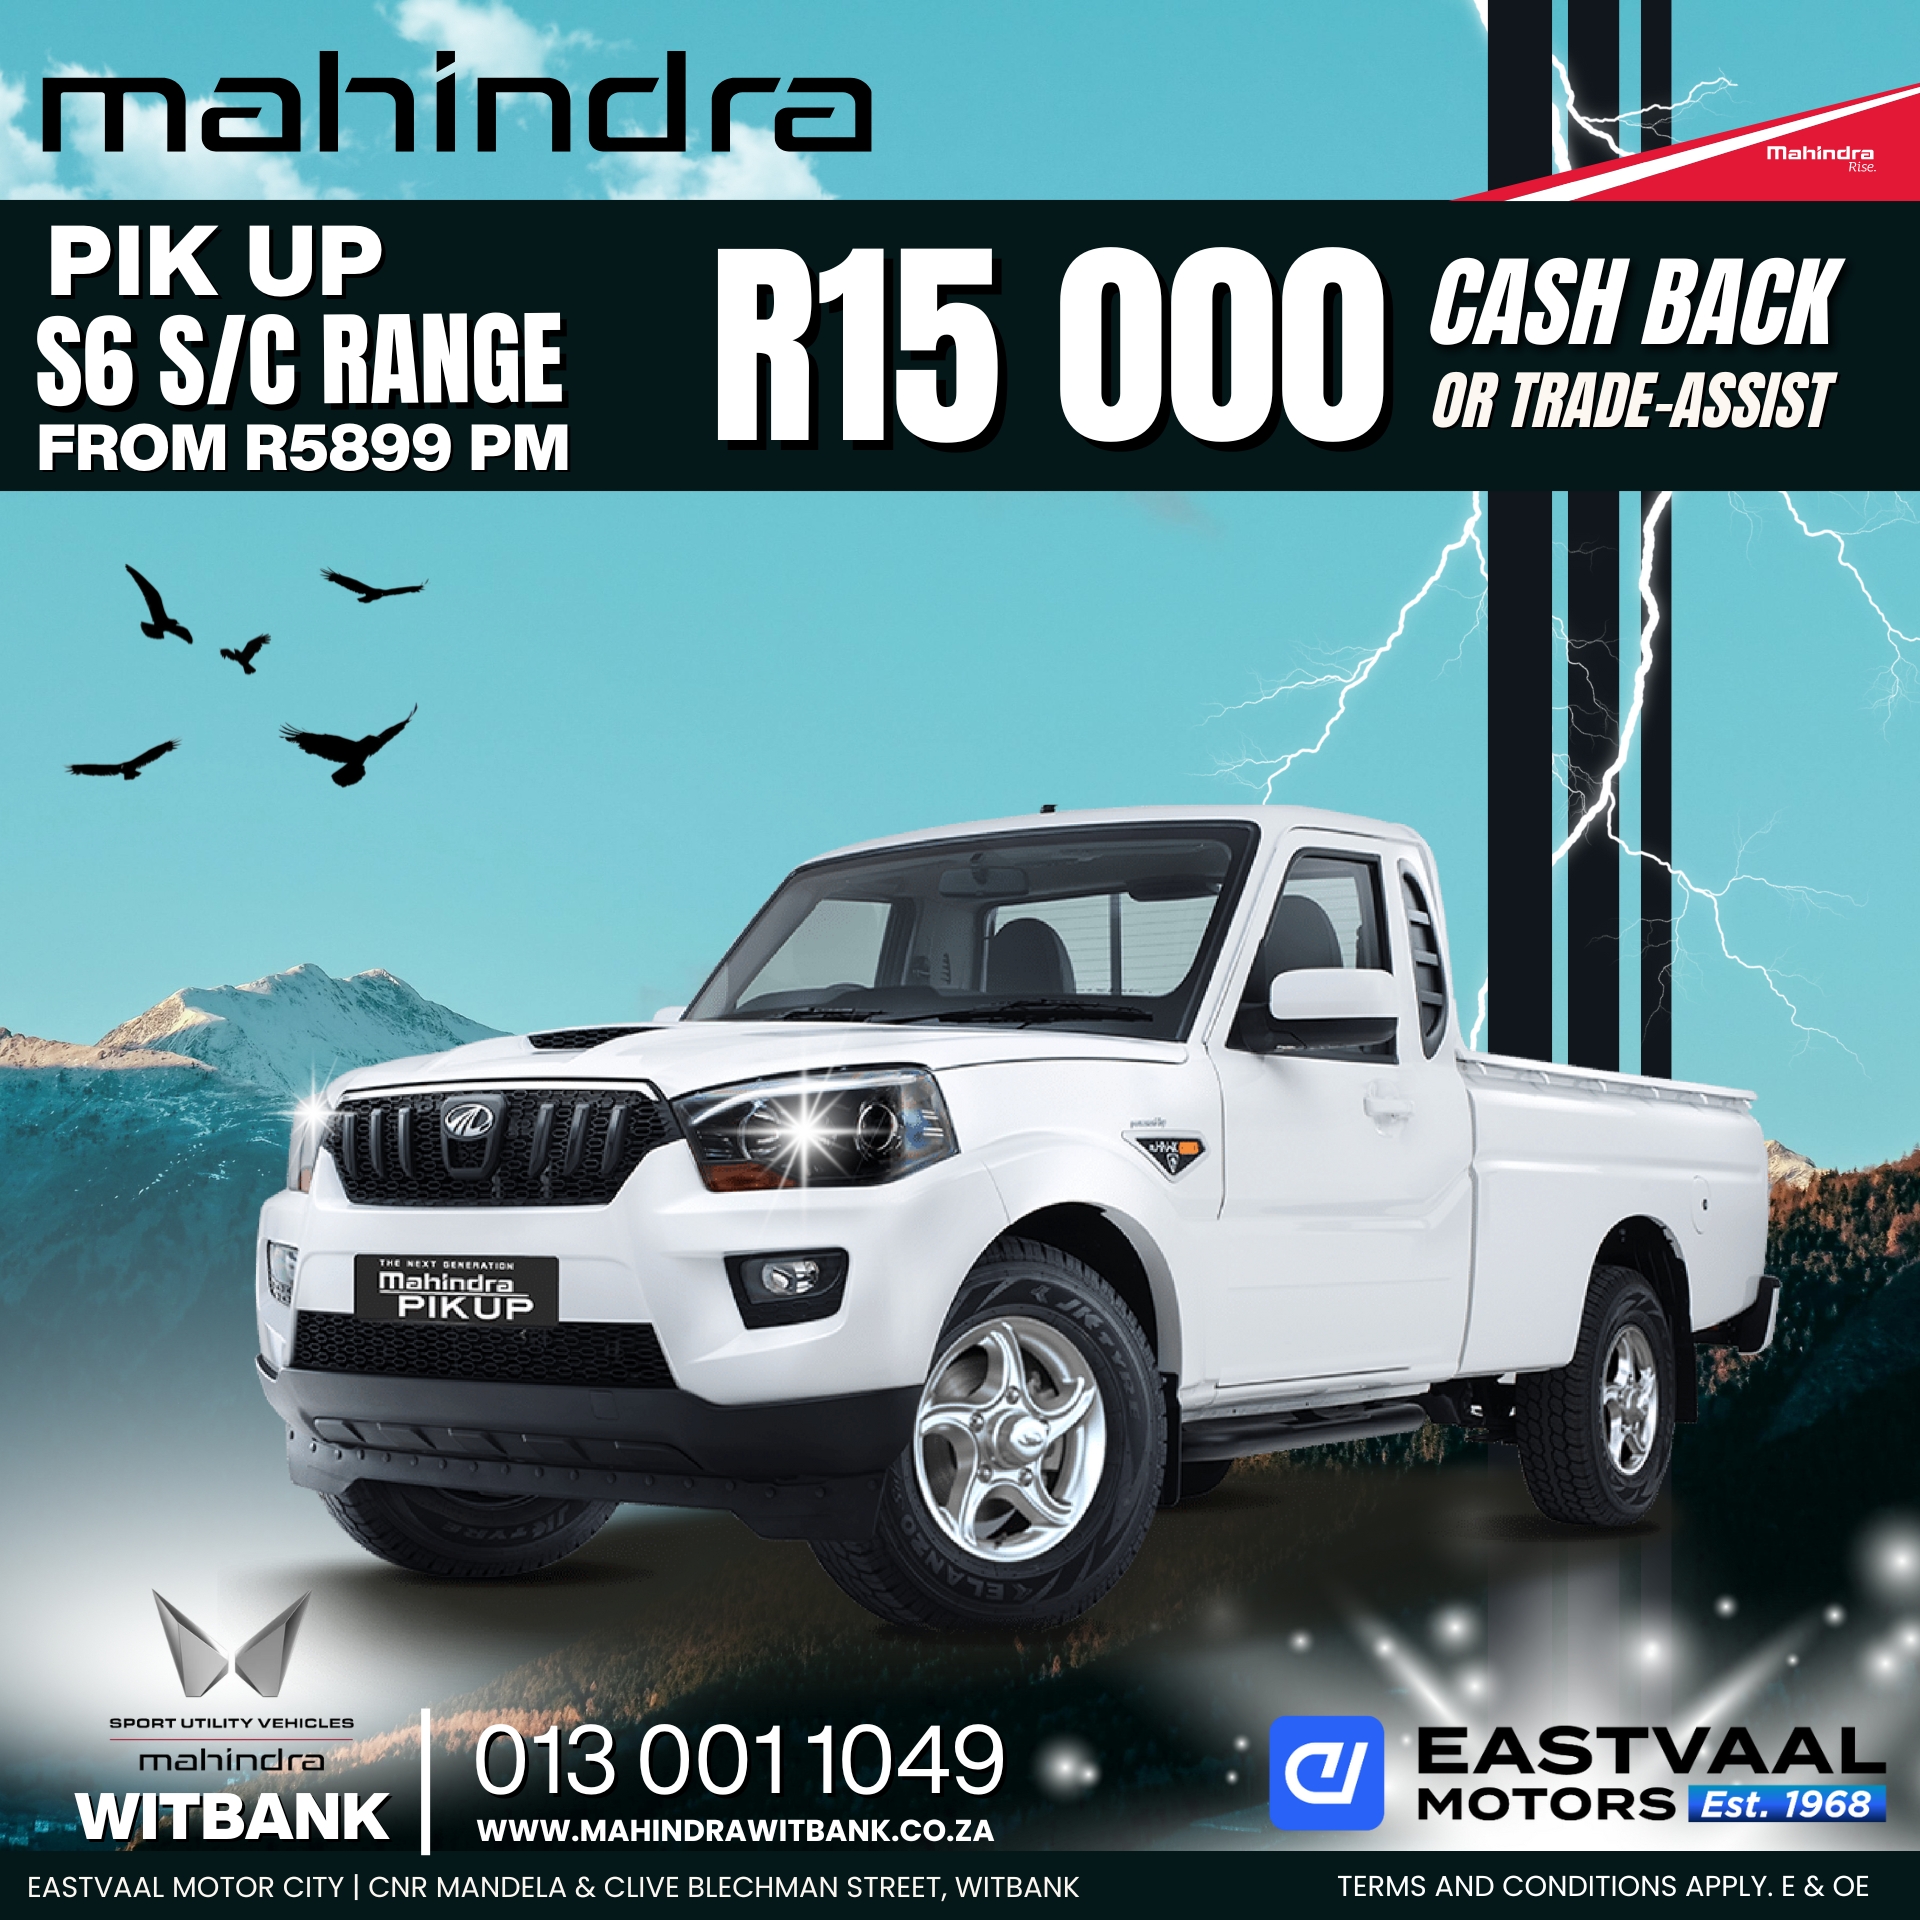 Upgrade your ride this July with a Mahindra from Eastvaal Motor City. Special prices await! image from 